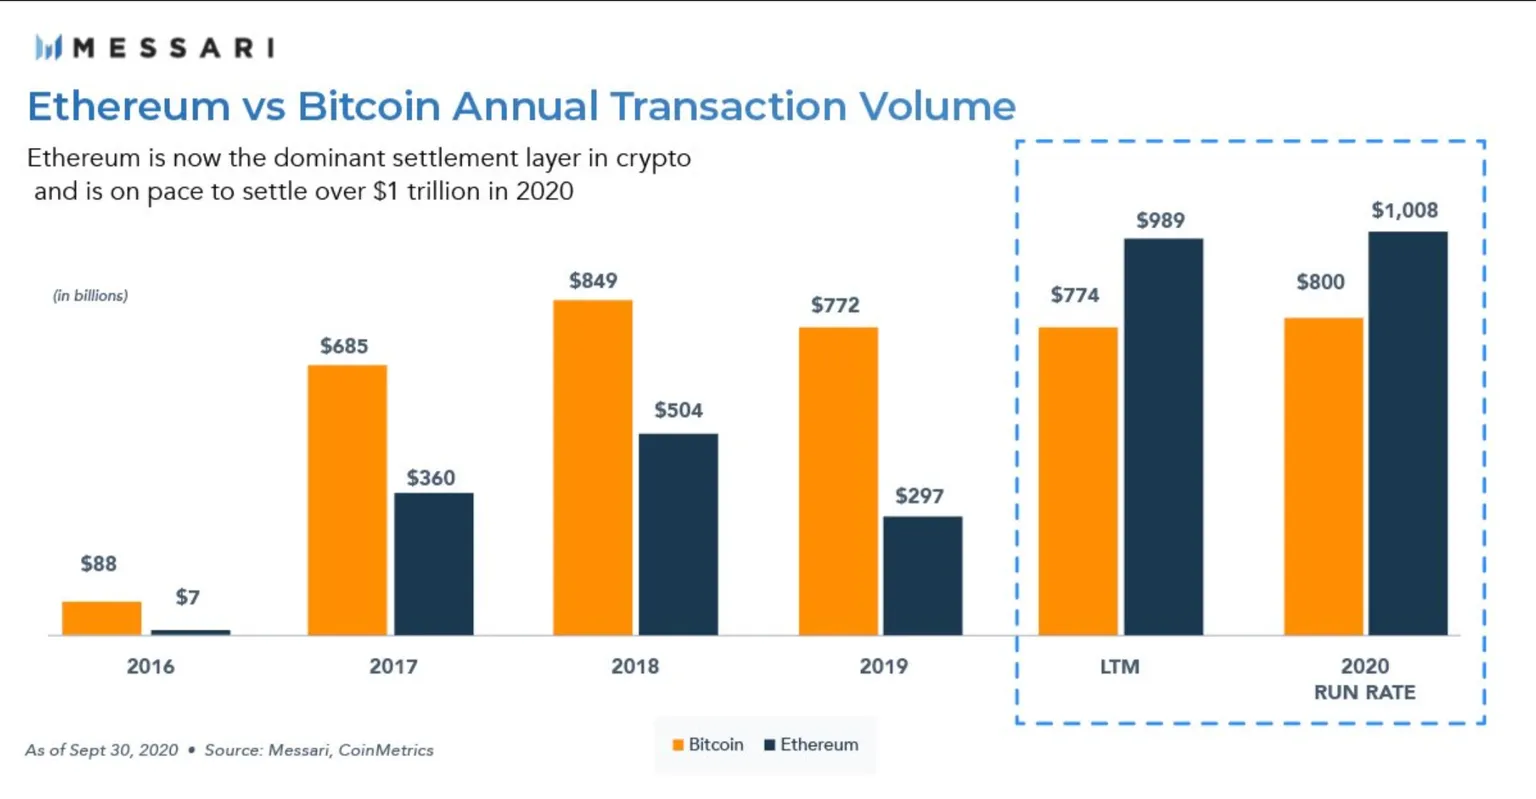 Messari chart showing Ethereum and Bitcoin annual transaction volumes